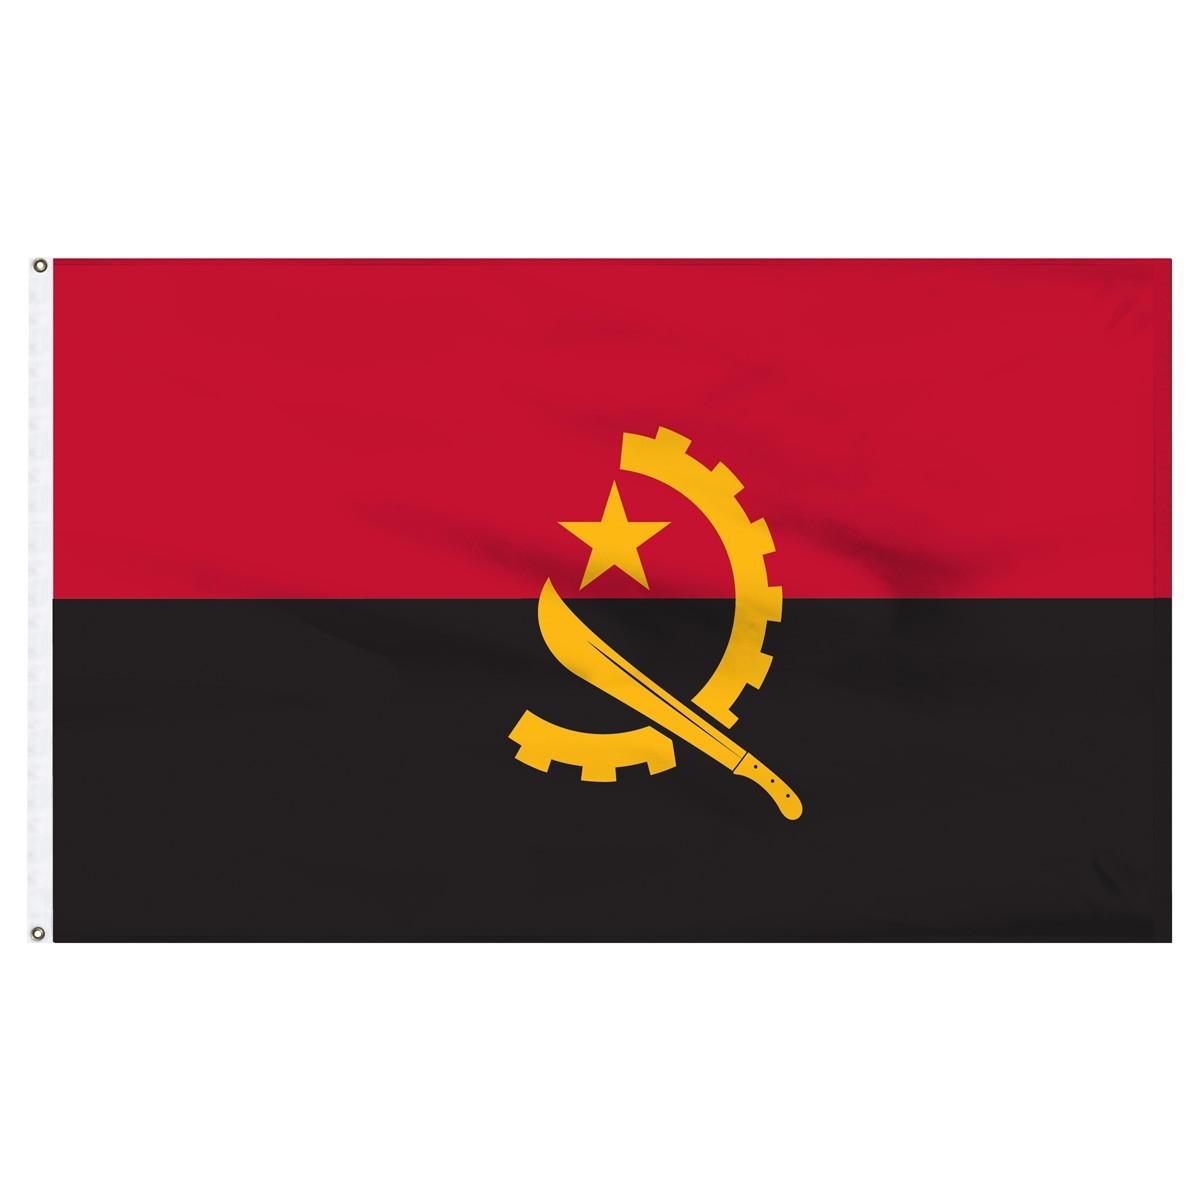 Shop the Flag of Angola and world flags high quality bulk orders with 1-800 Flags. These flags are great for schools, churches, businesses. 